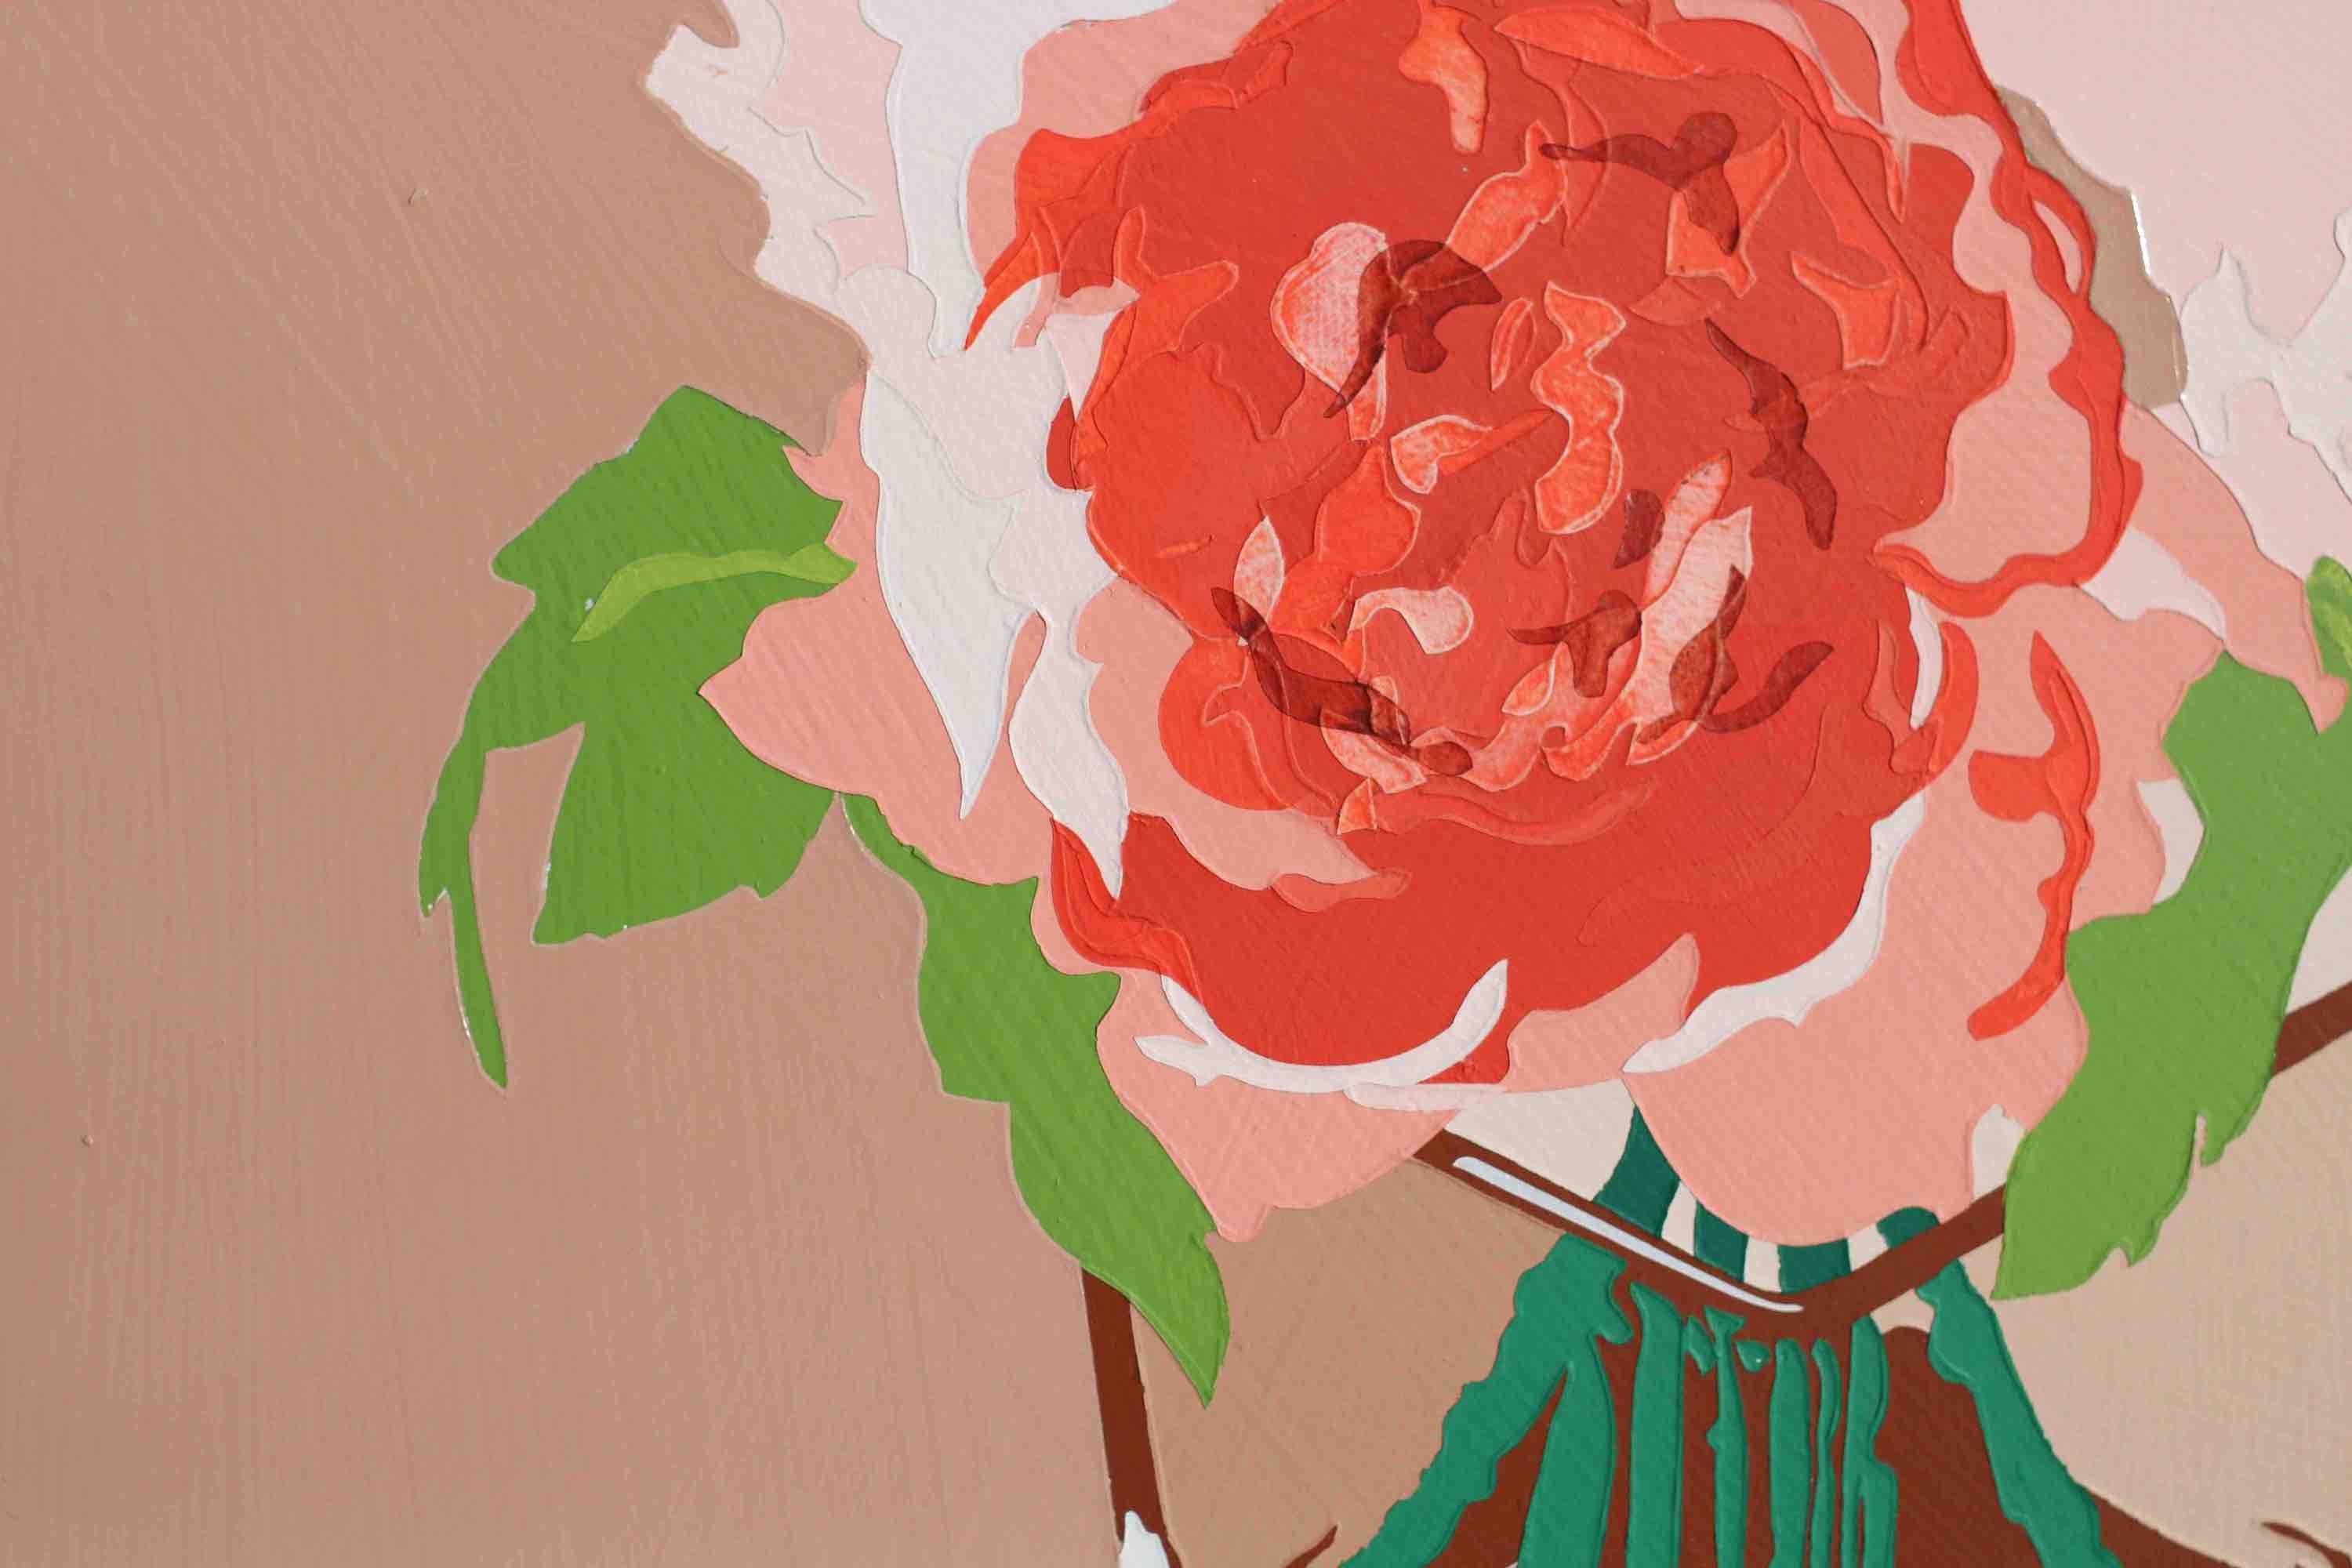 Lori Larusso, an American visual artist, explores themes of domesticity in her work, including this stunning flower painting series. By using layers of bright acrylic paint, often with high-gloss varnish, Larusso's paintings reflect on ordinary